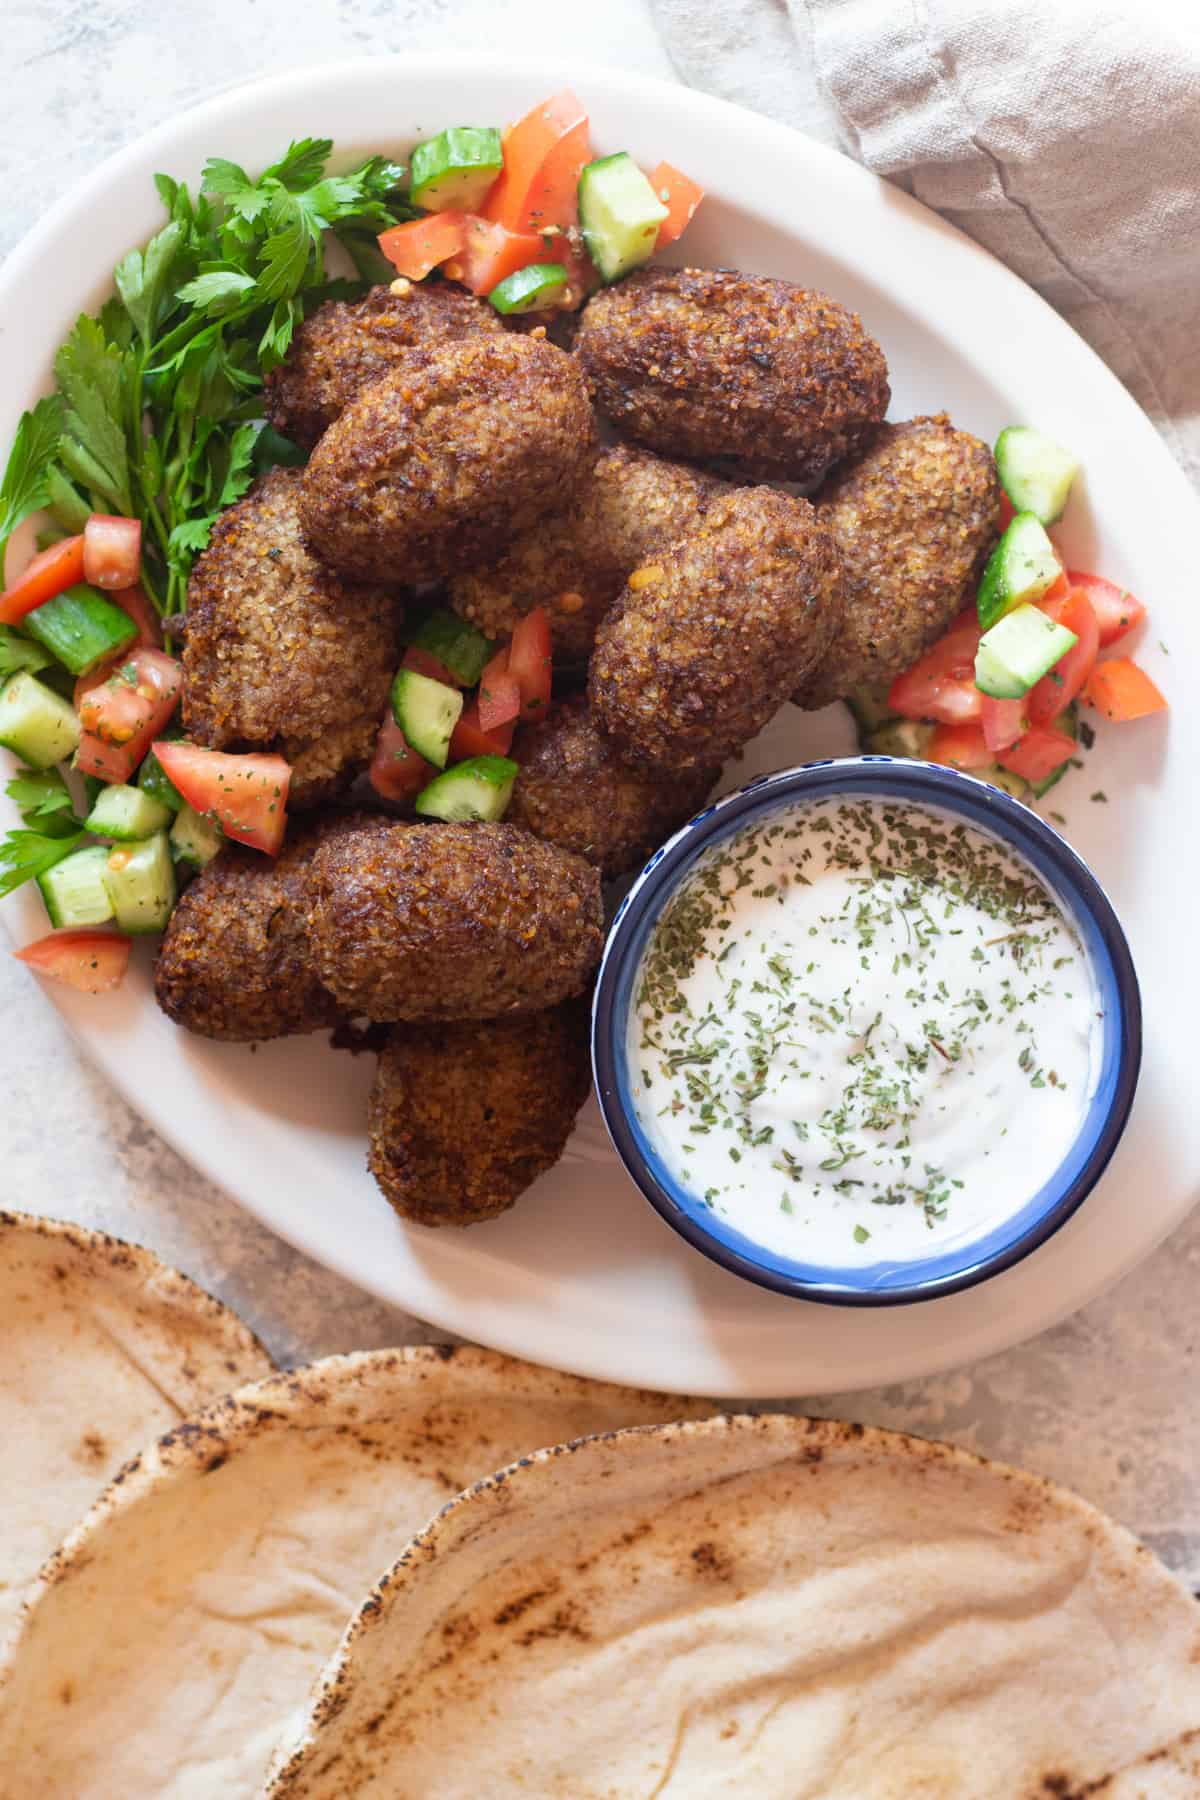 Kibbeh is a Middle Eastern dish made of bulgur, ground beef and warm spices. Learn how to make this kibbeh recipe with this step-by-step tutorial and video. Kibbeh is made of a tender shell stuffed with a delicious spiced filling and is full of amazing Middle Eastern flavors.